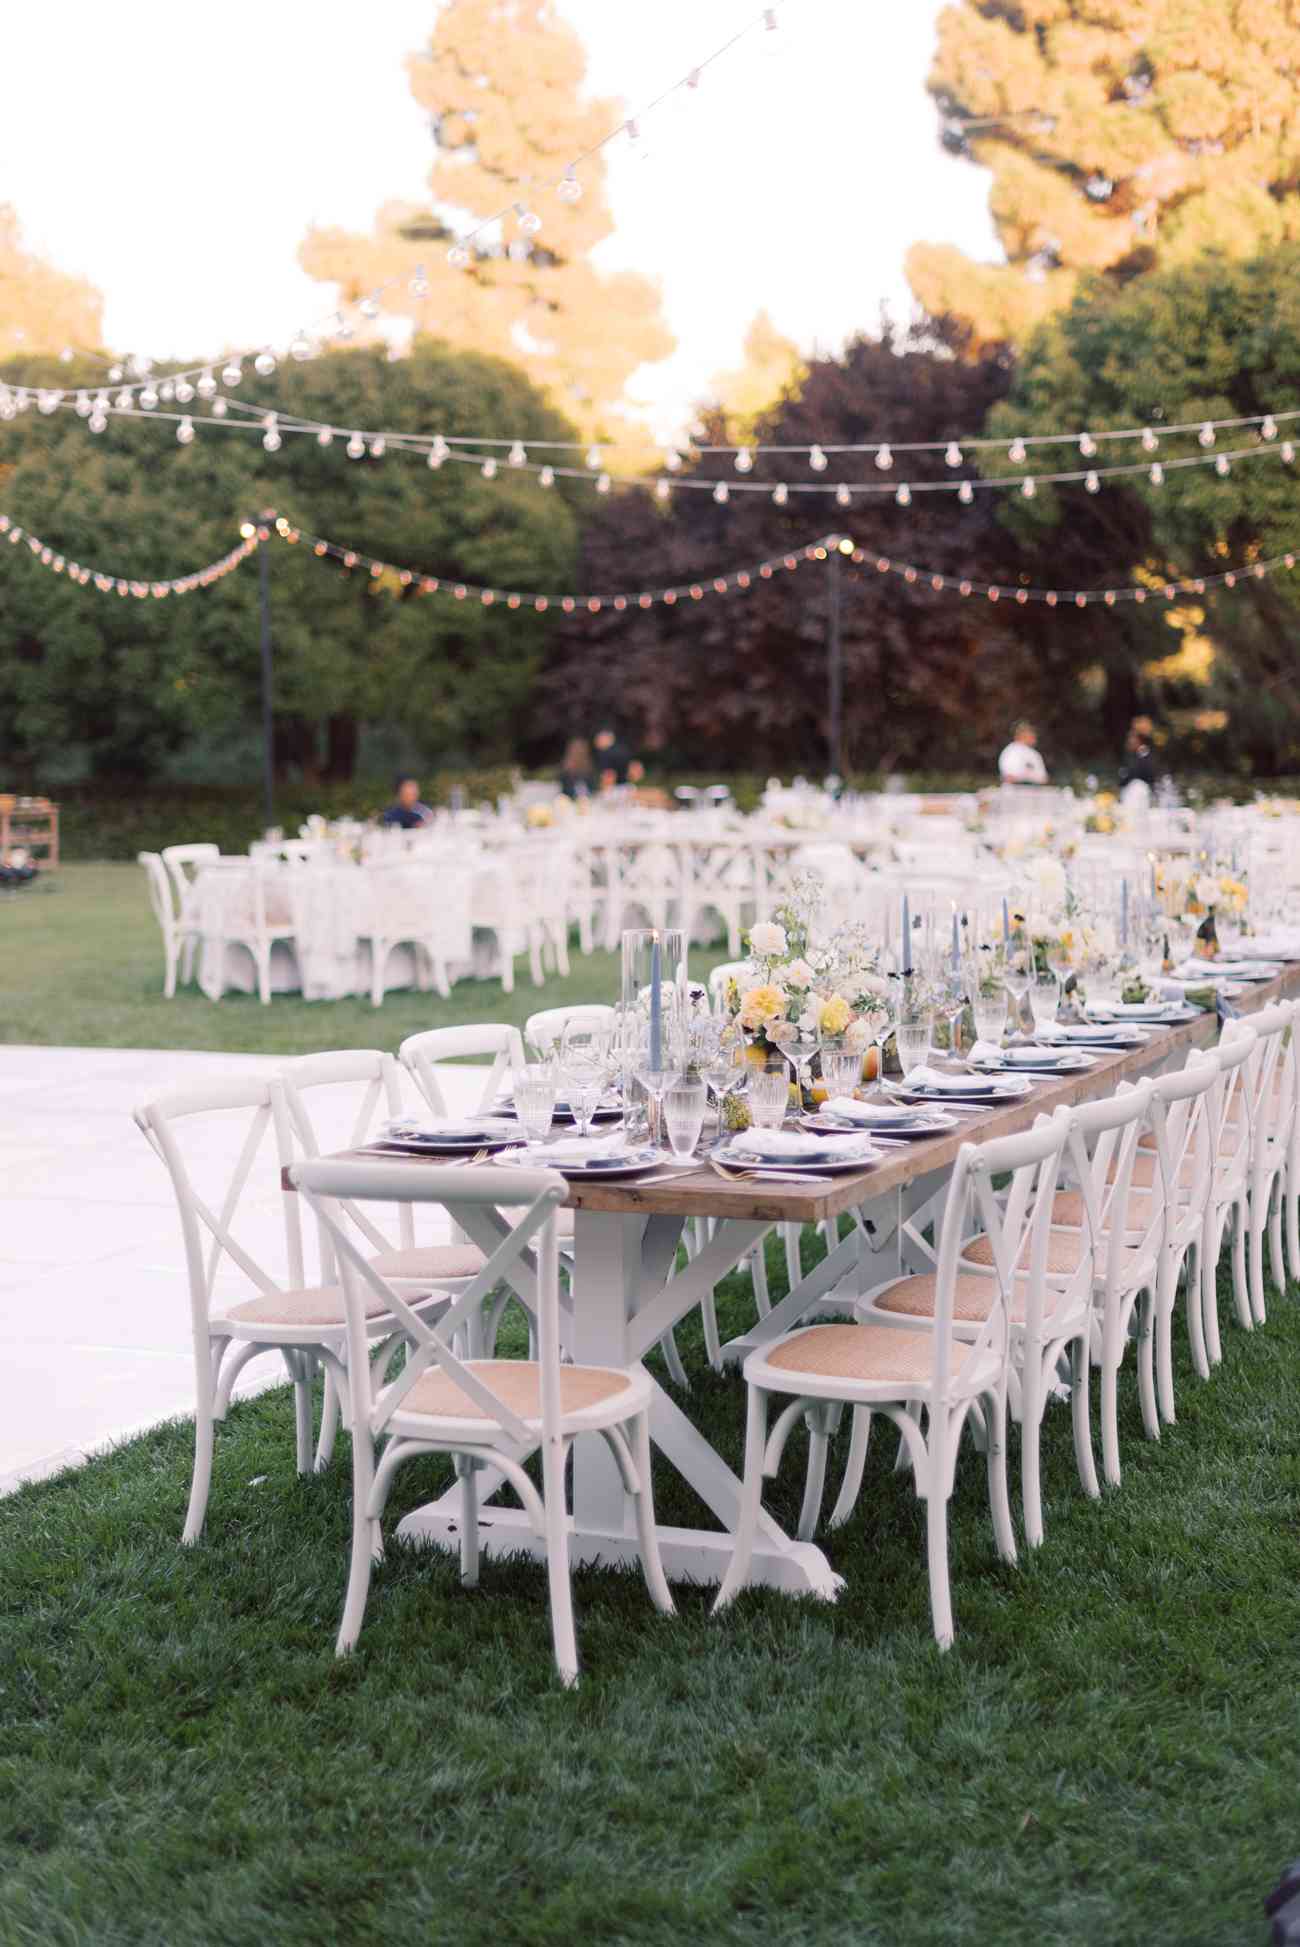 Surprising Things You Can Rent for Your Wedding   Martha Stewart